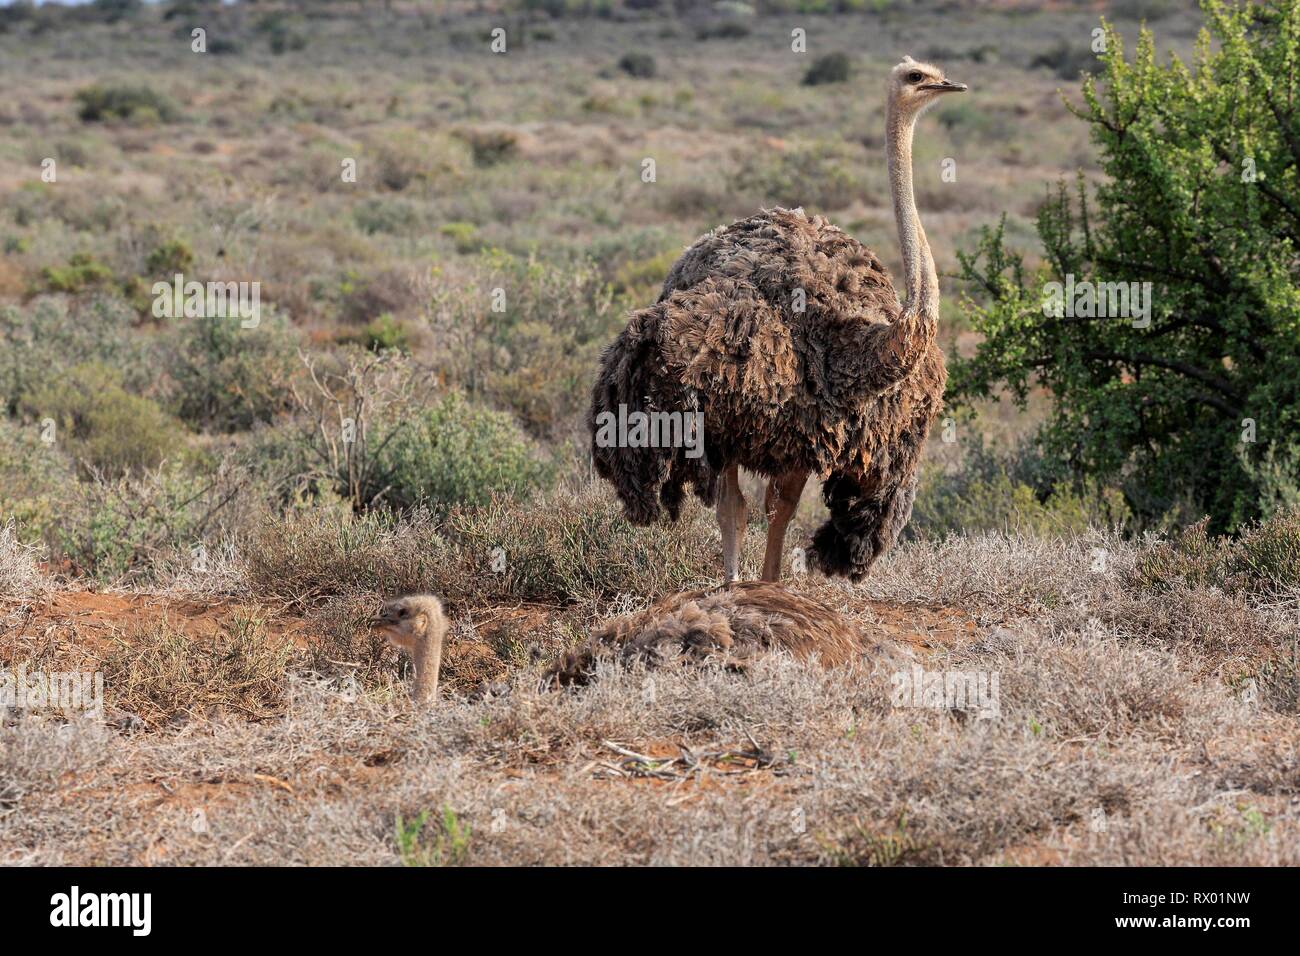 South African ostriches (Struthio camelus australis), two females on clutch, breeding on nest, Little Karoo, Western Cape Stock Photo